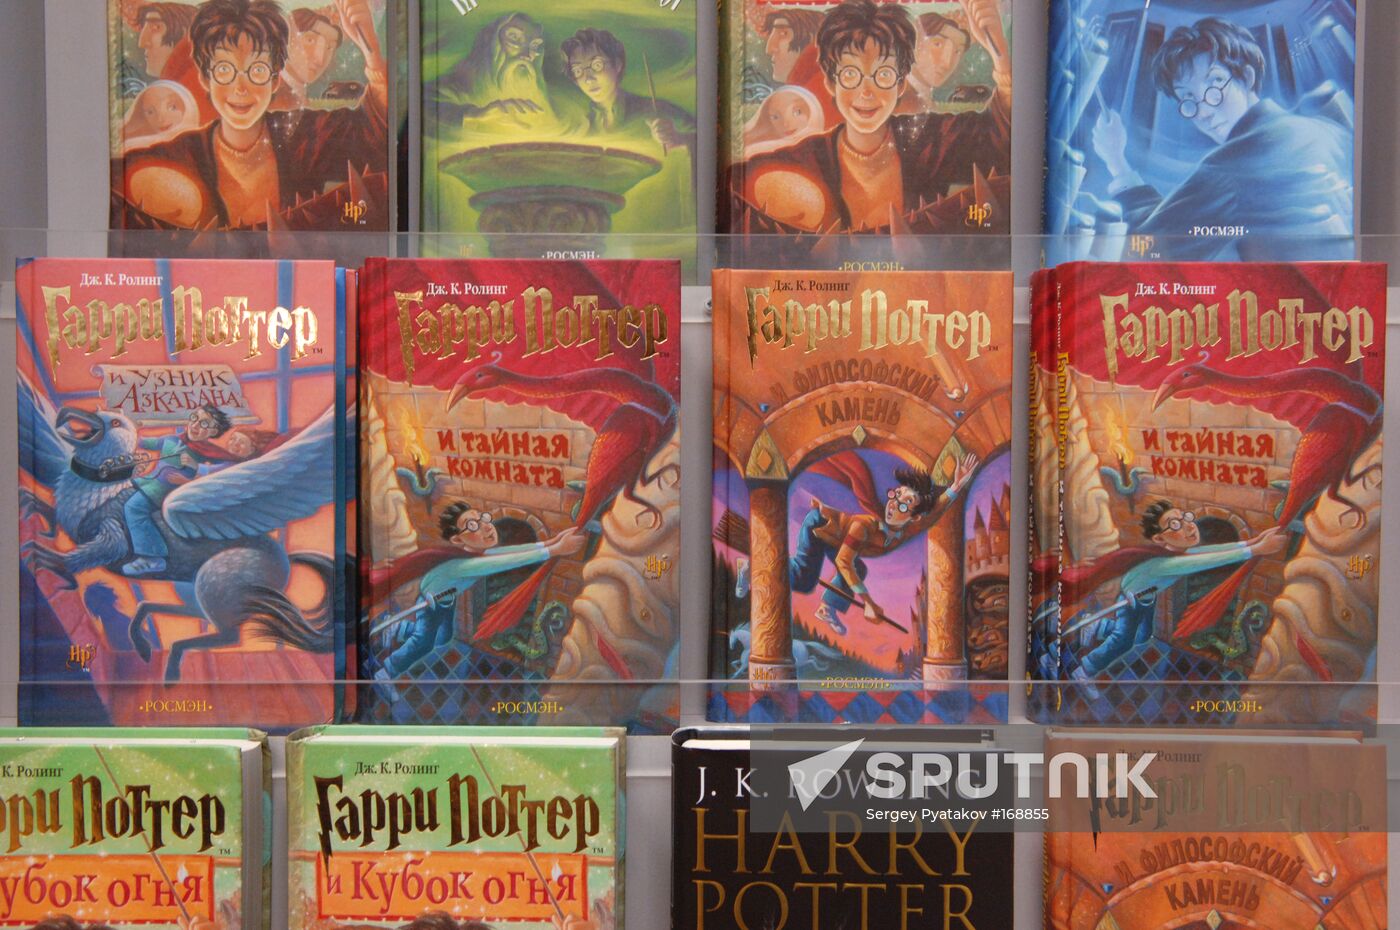 Harry Potter and the Gift of Death goes on sale